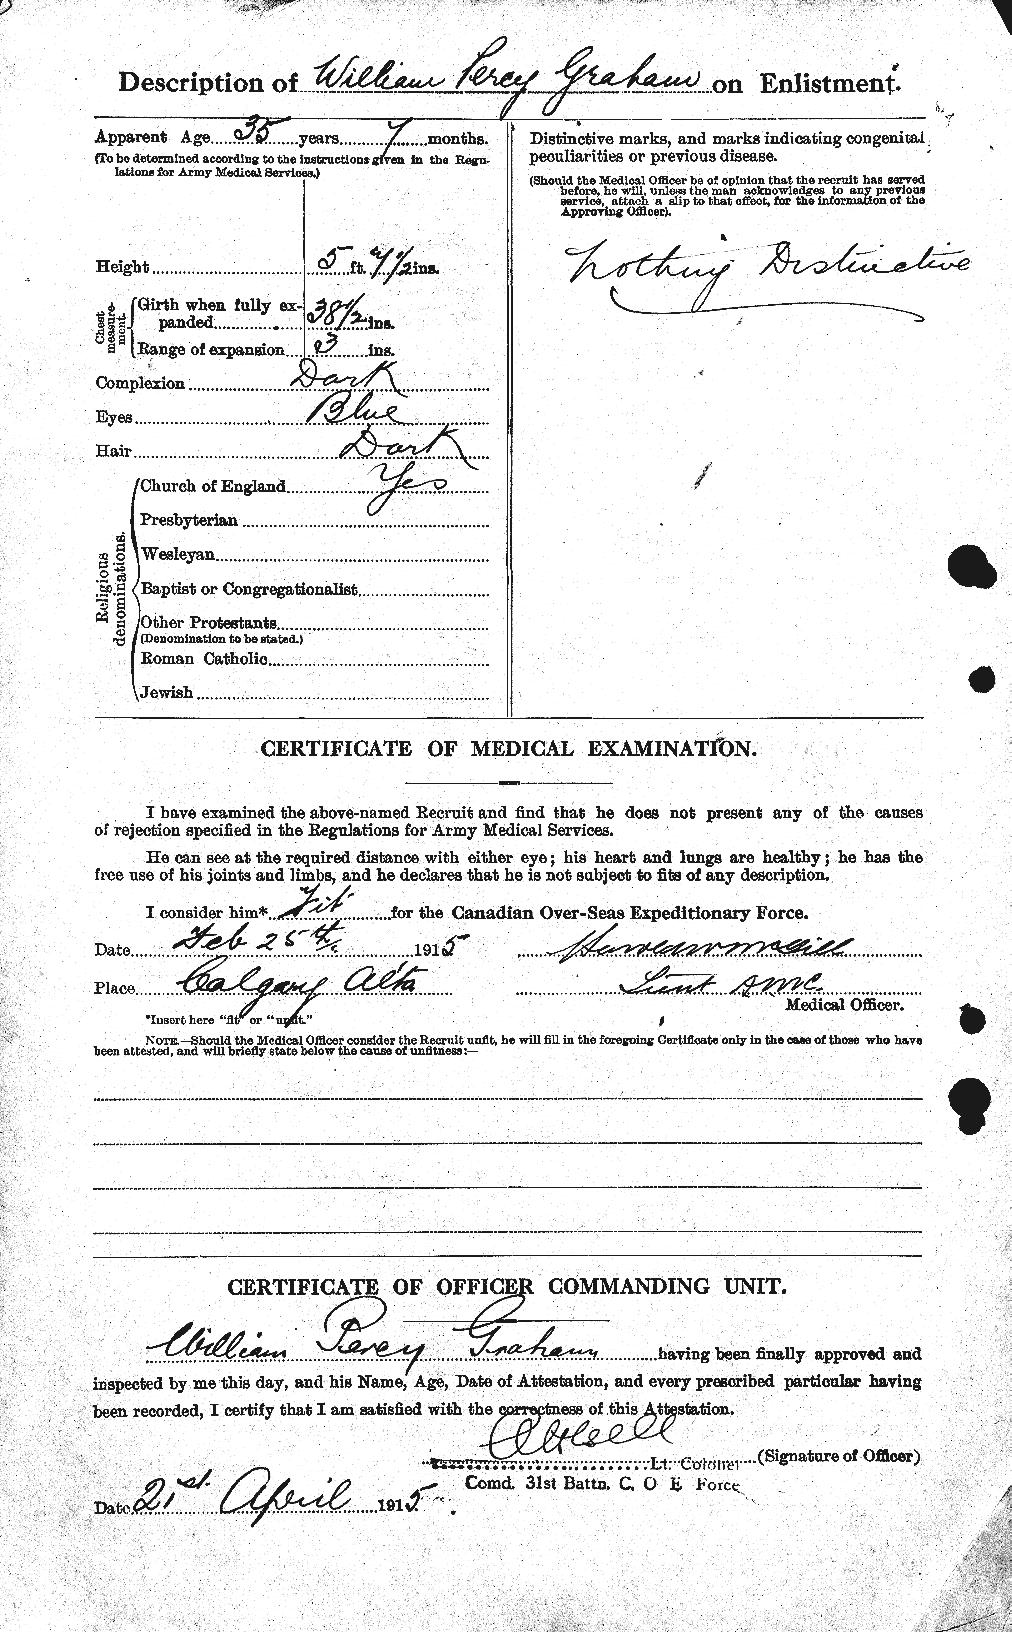 Personnel Records of the First World War - CEF 358031b